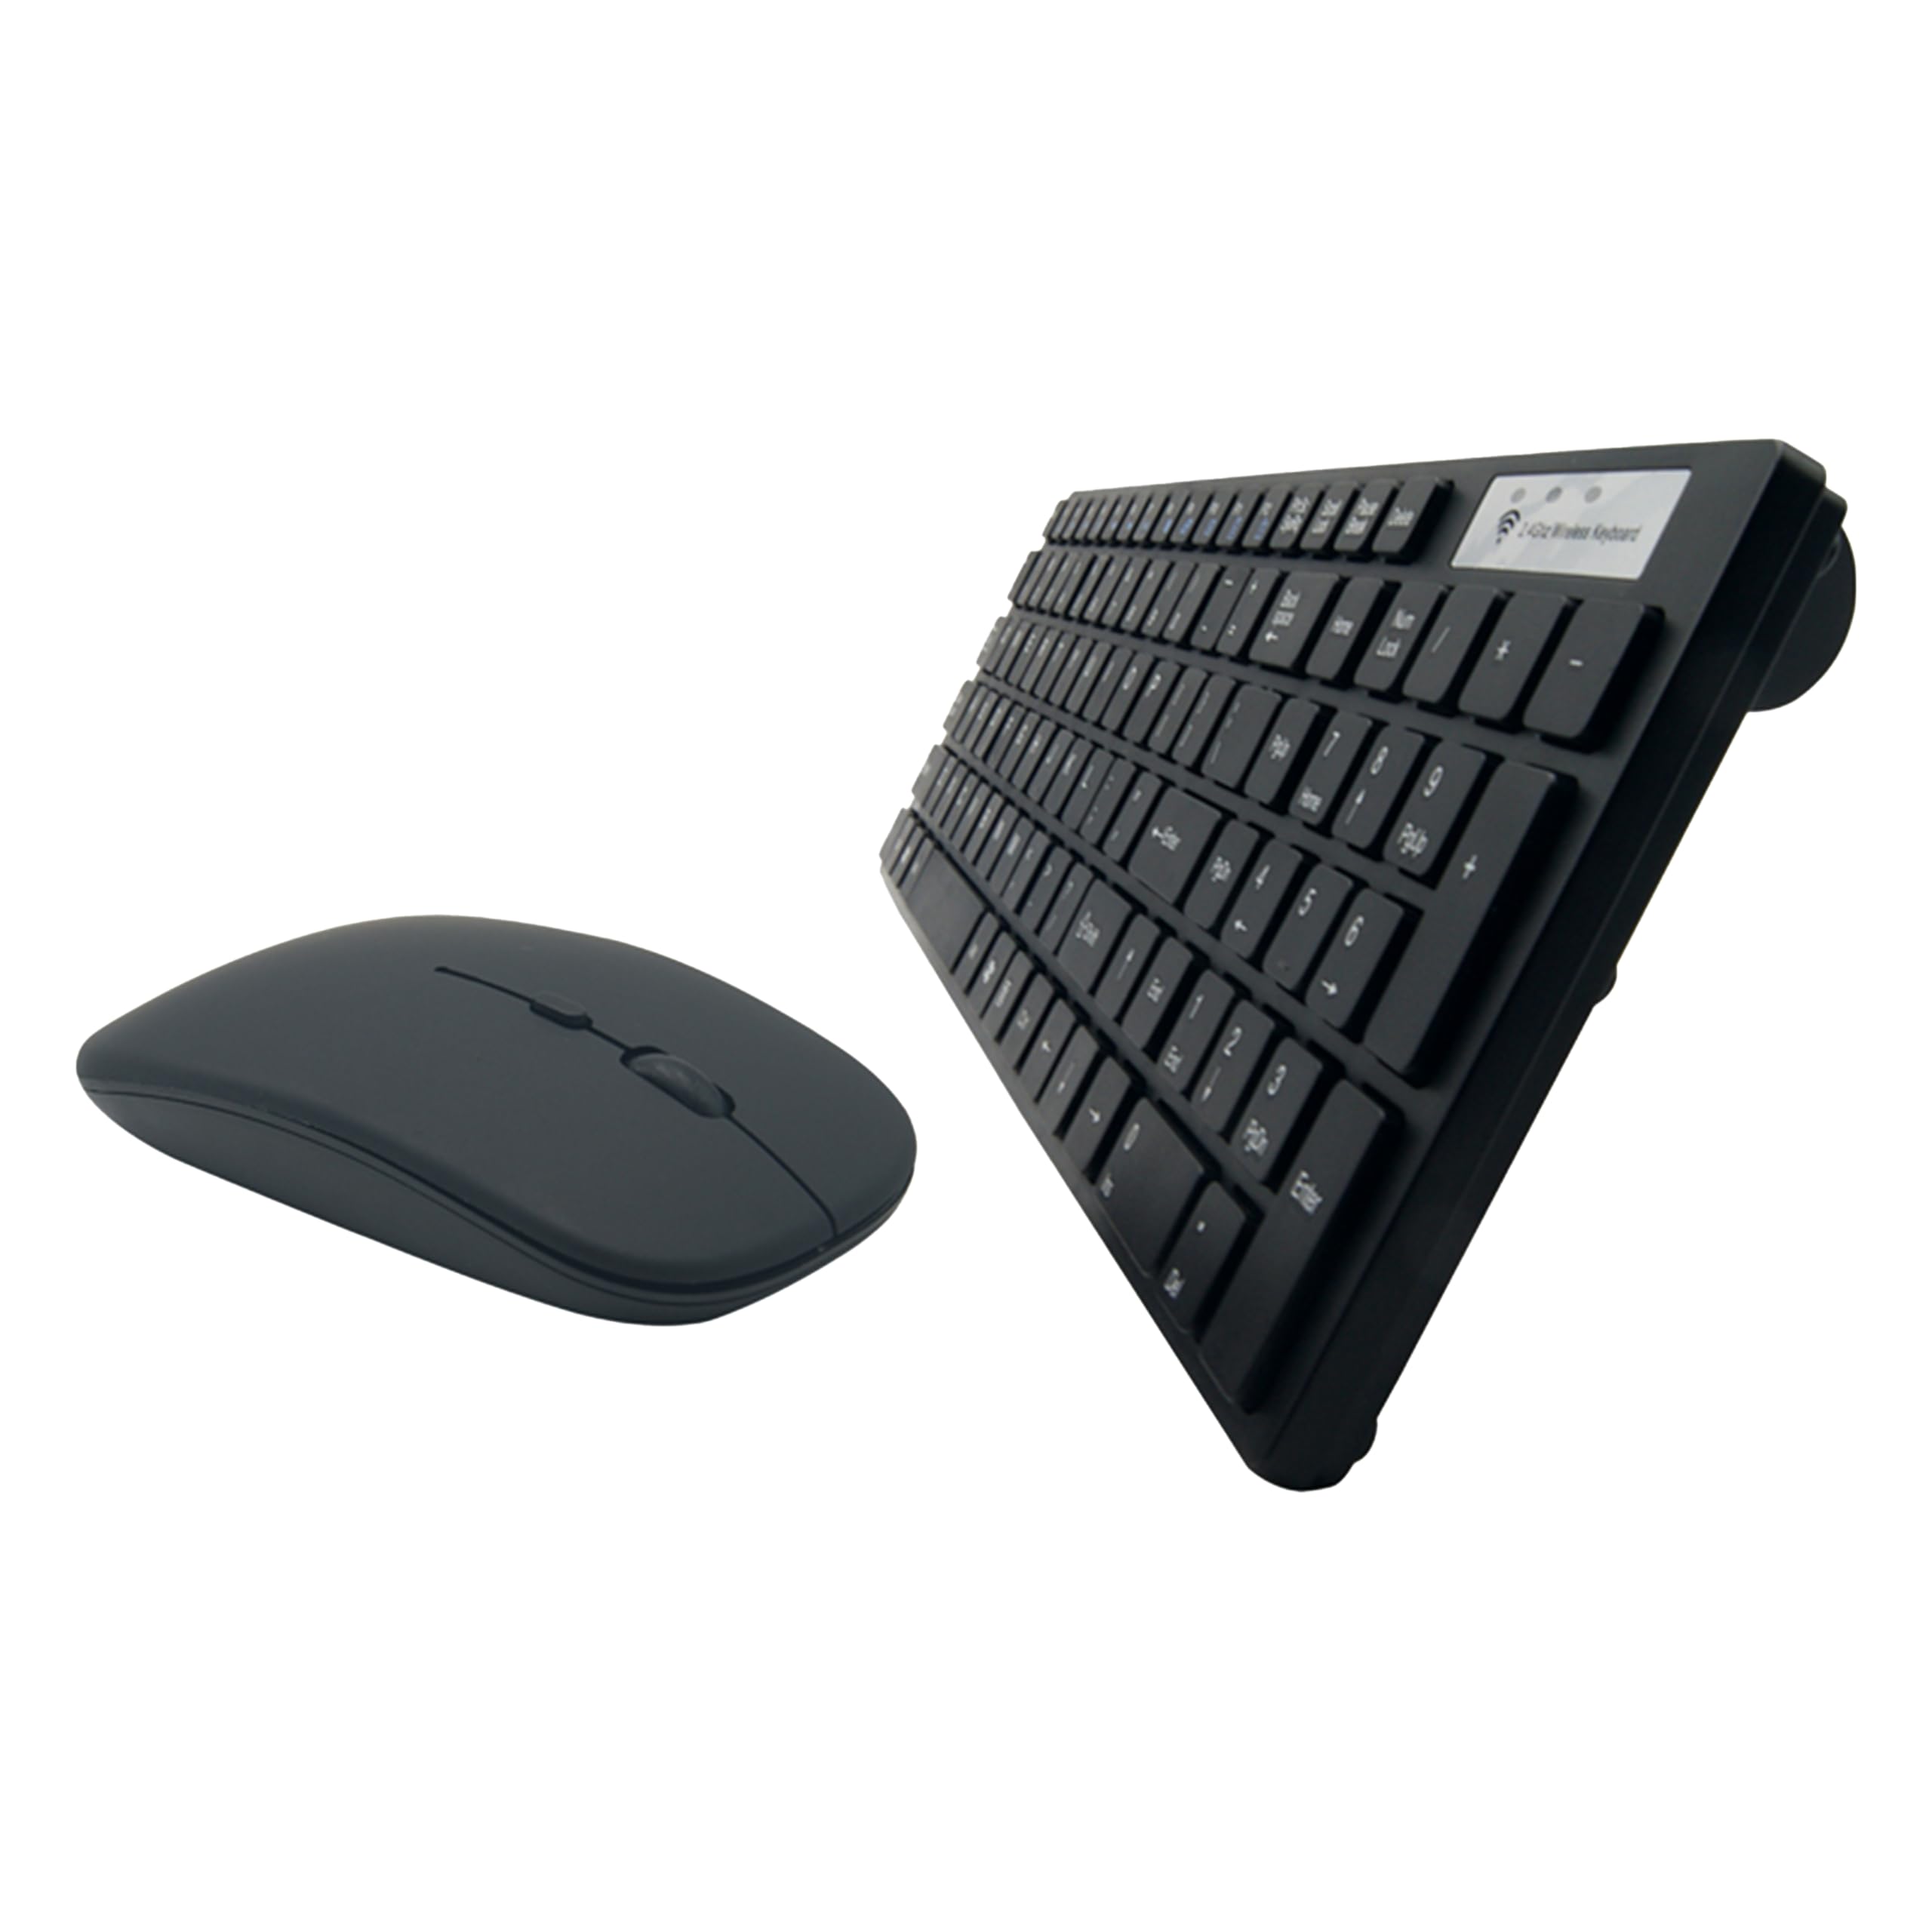 Supersonic SC-530KBM Ultra Thin Wireless Keyboard/Mouse Combo, Comfortable Typing, 15° Tilted Angle, 104 Keys, Auto Sleep, 2.4G Wireless Dongle, 33FT Range, Compatible with Android, Windows and Mac